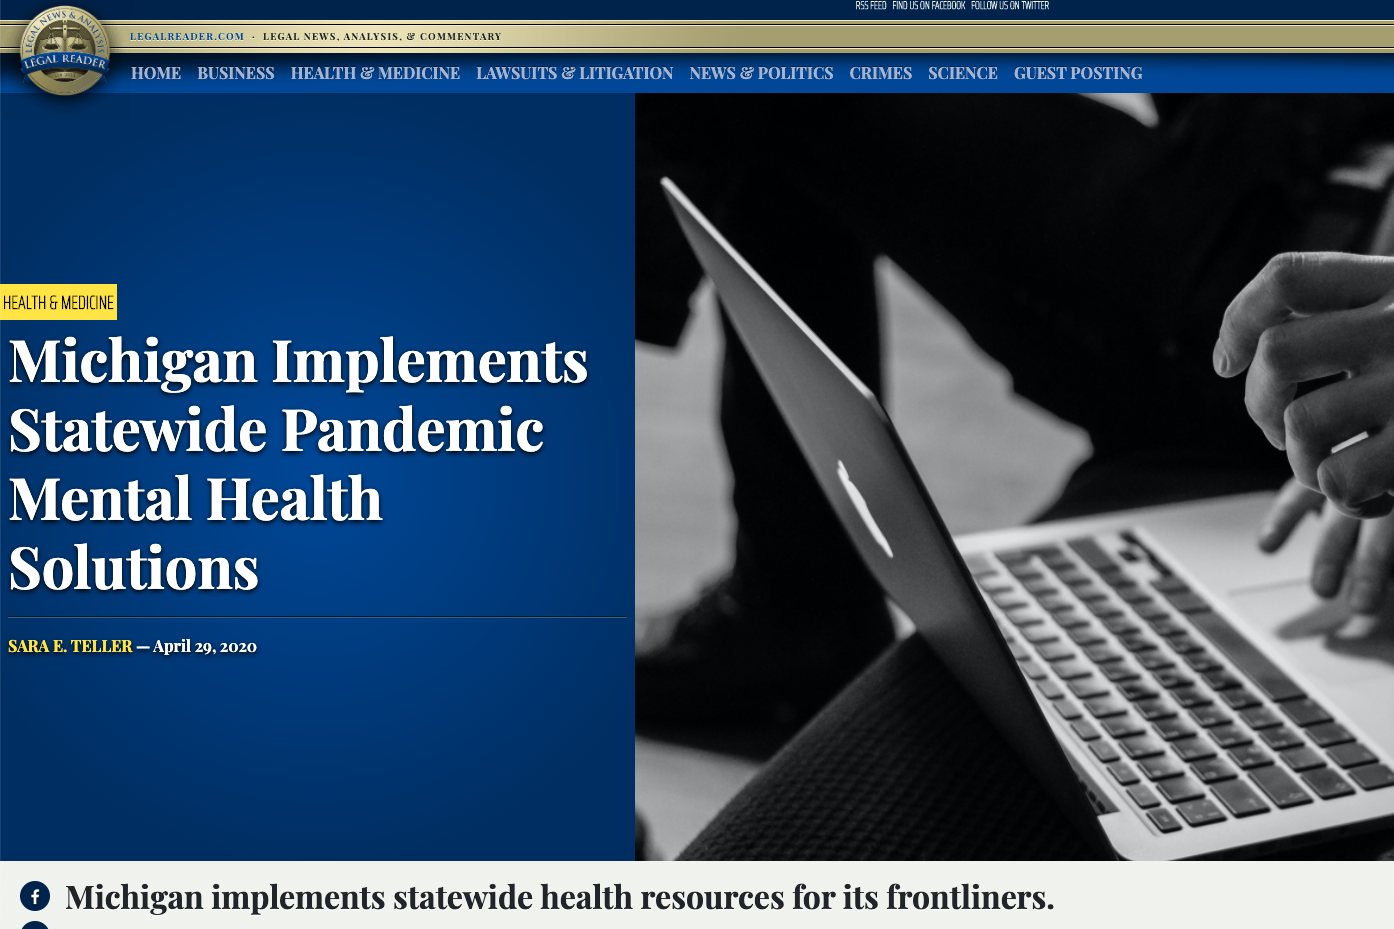 Michigan implements statewide pandemic mental health solutions